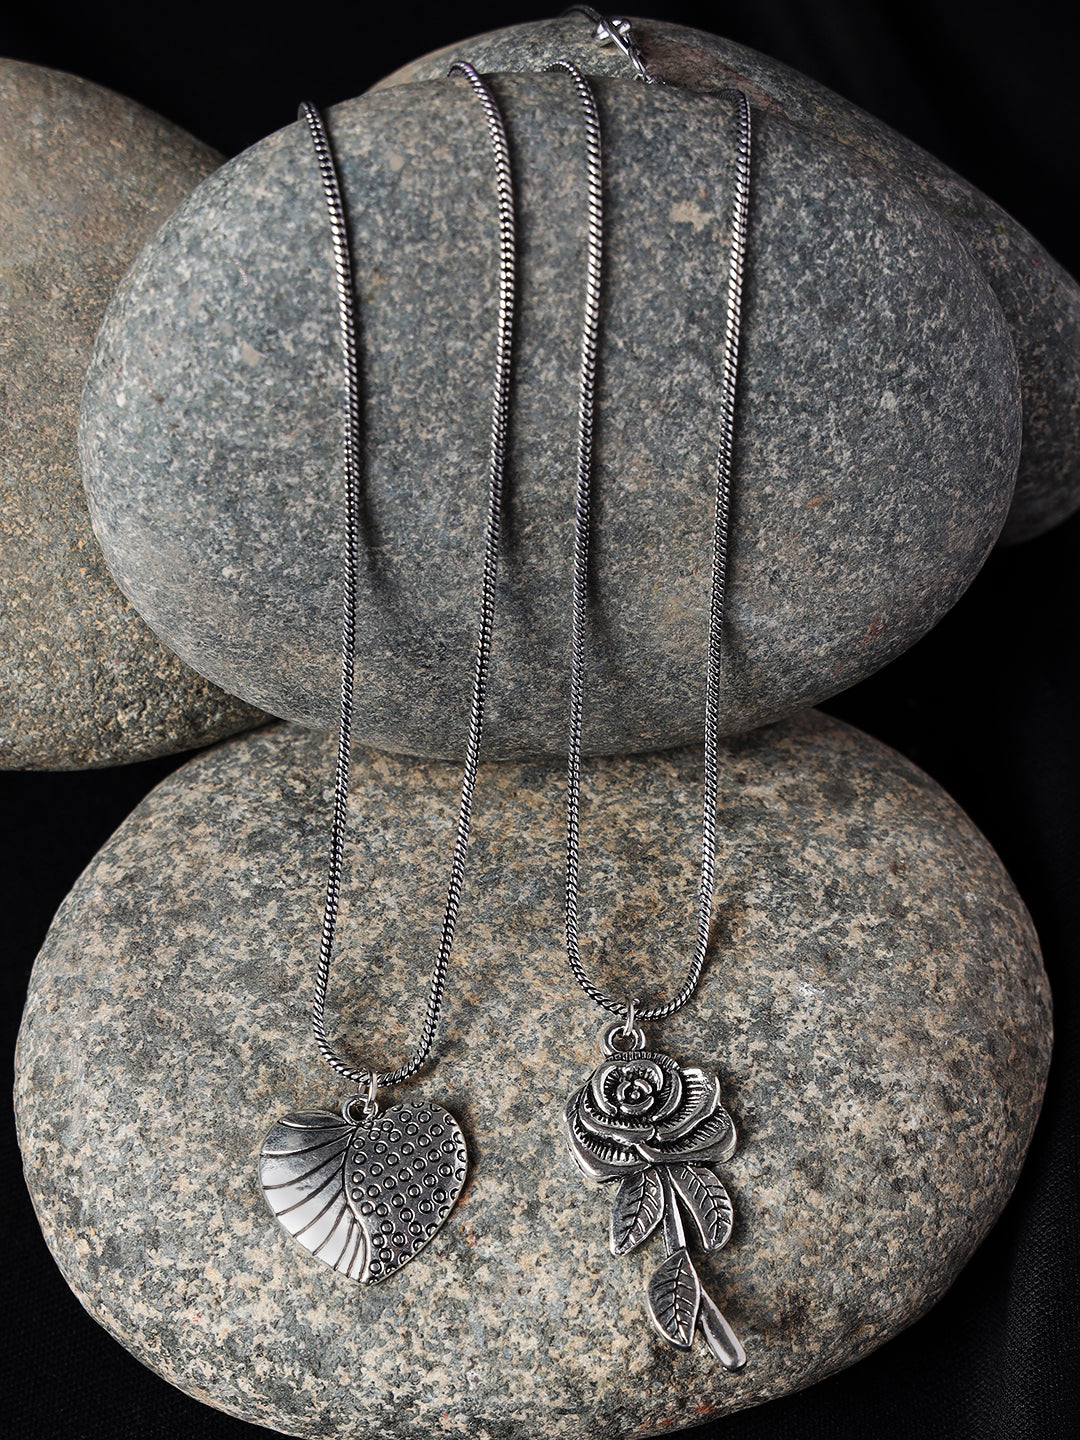 Set of 2 Heart & Rose shaped Oxidised Silver-Toned Textured Necklace